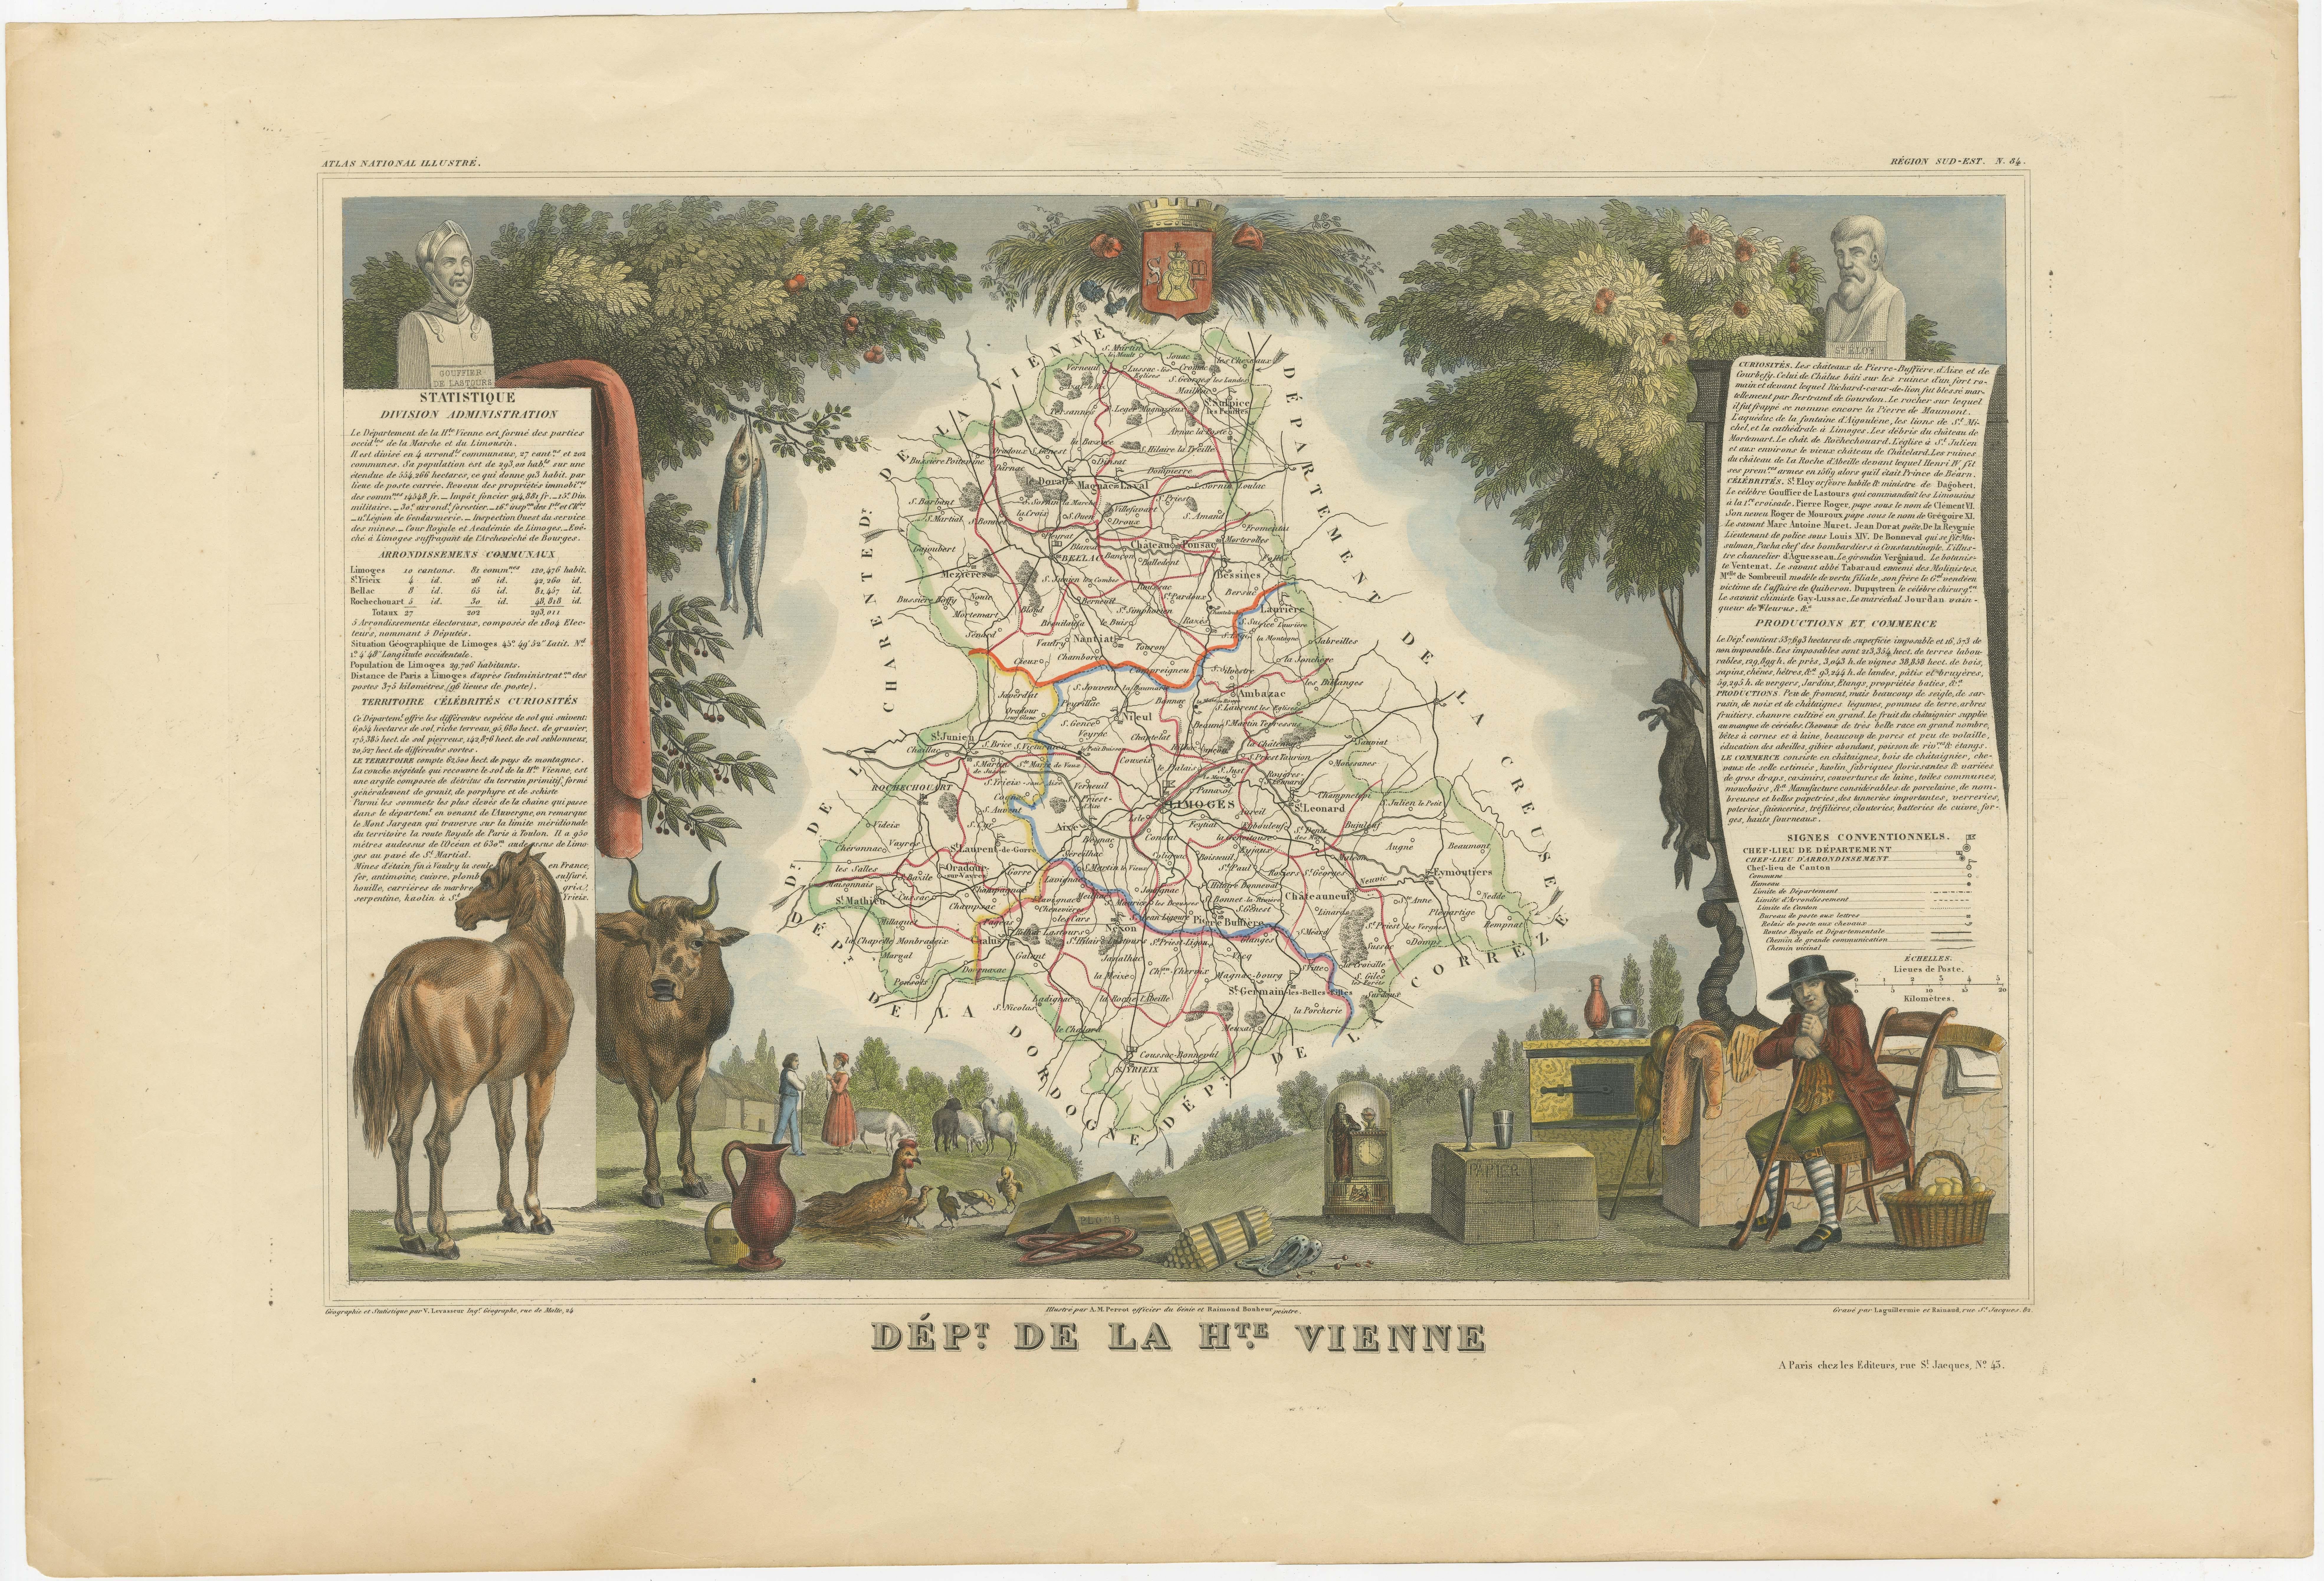 Antique map titled 'Dépt. de l'Ariège'. Map of the French department of Haute-Vienne, France. Haute-Vienne is home to the commune of Limoge, which makes oak barrels used in the production of Cognac. This area is also quite famous for its porcelain